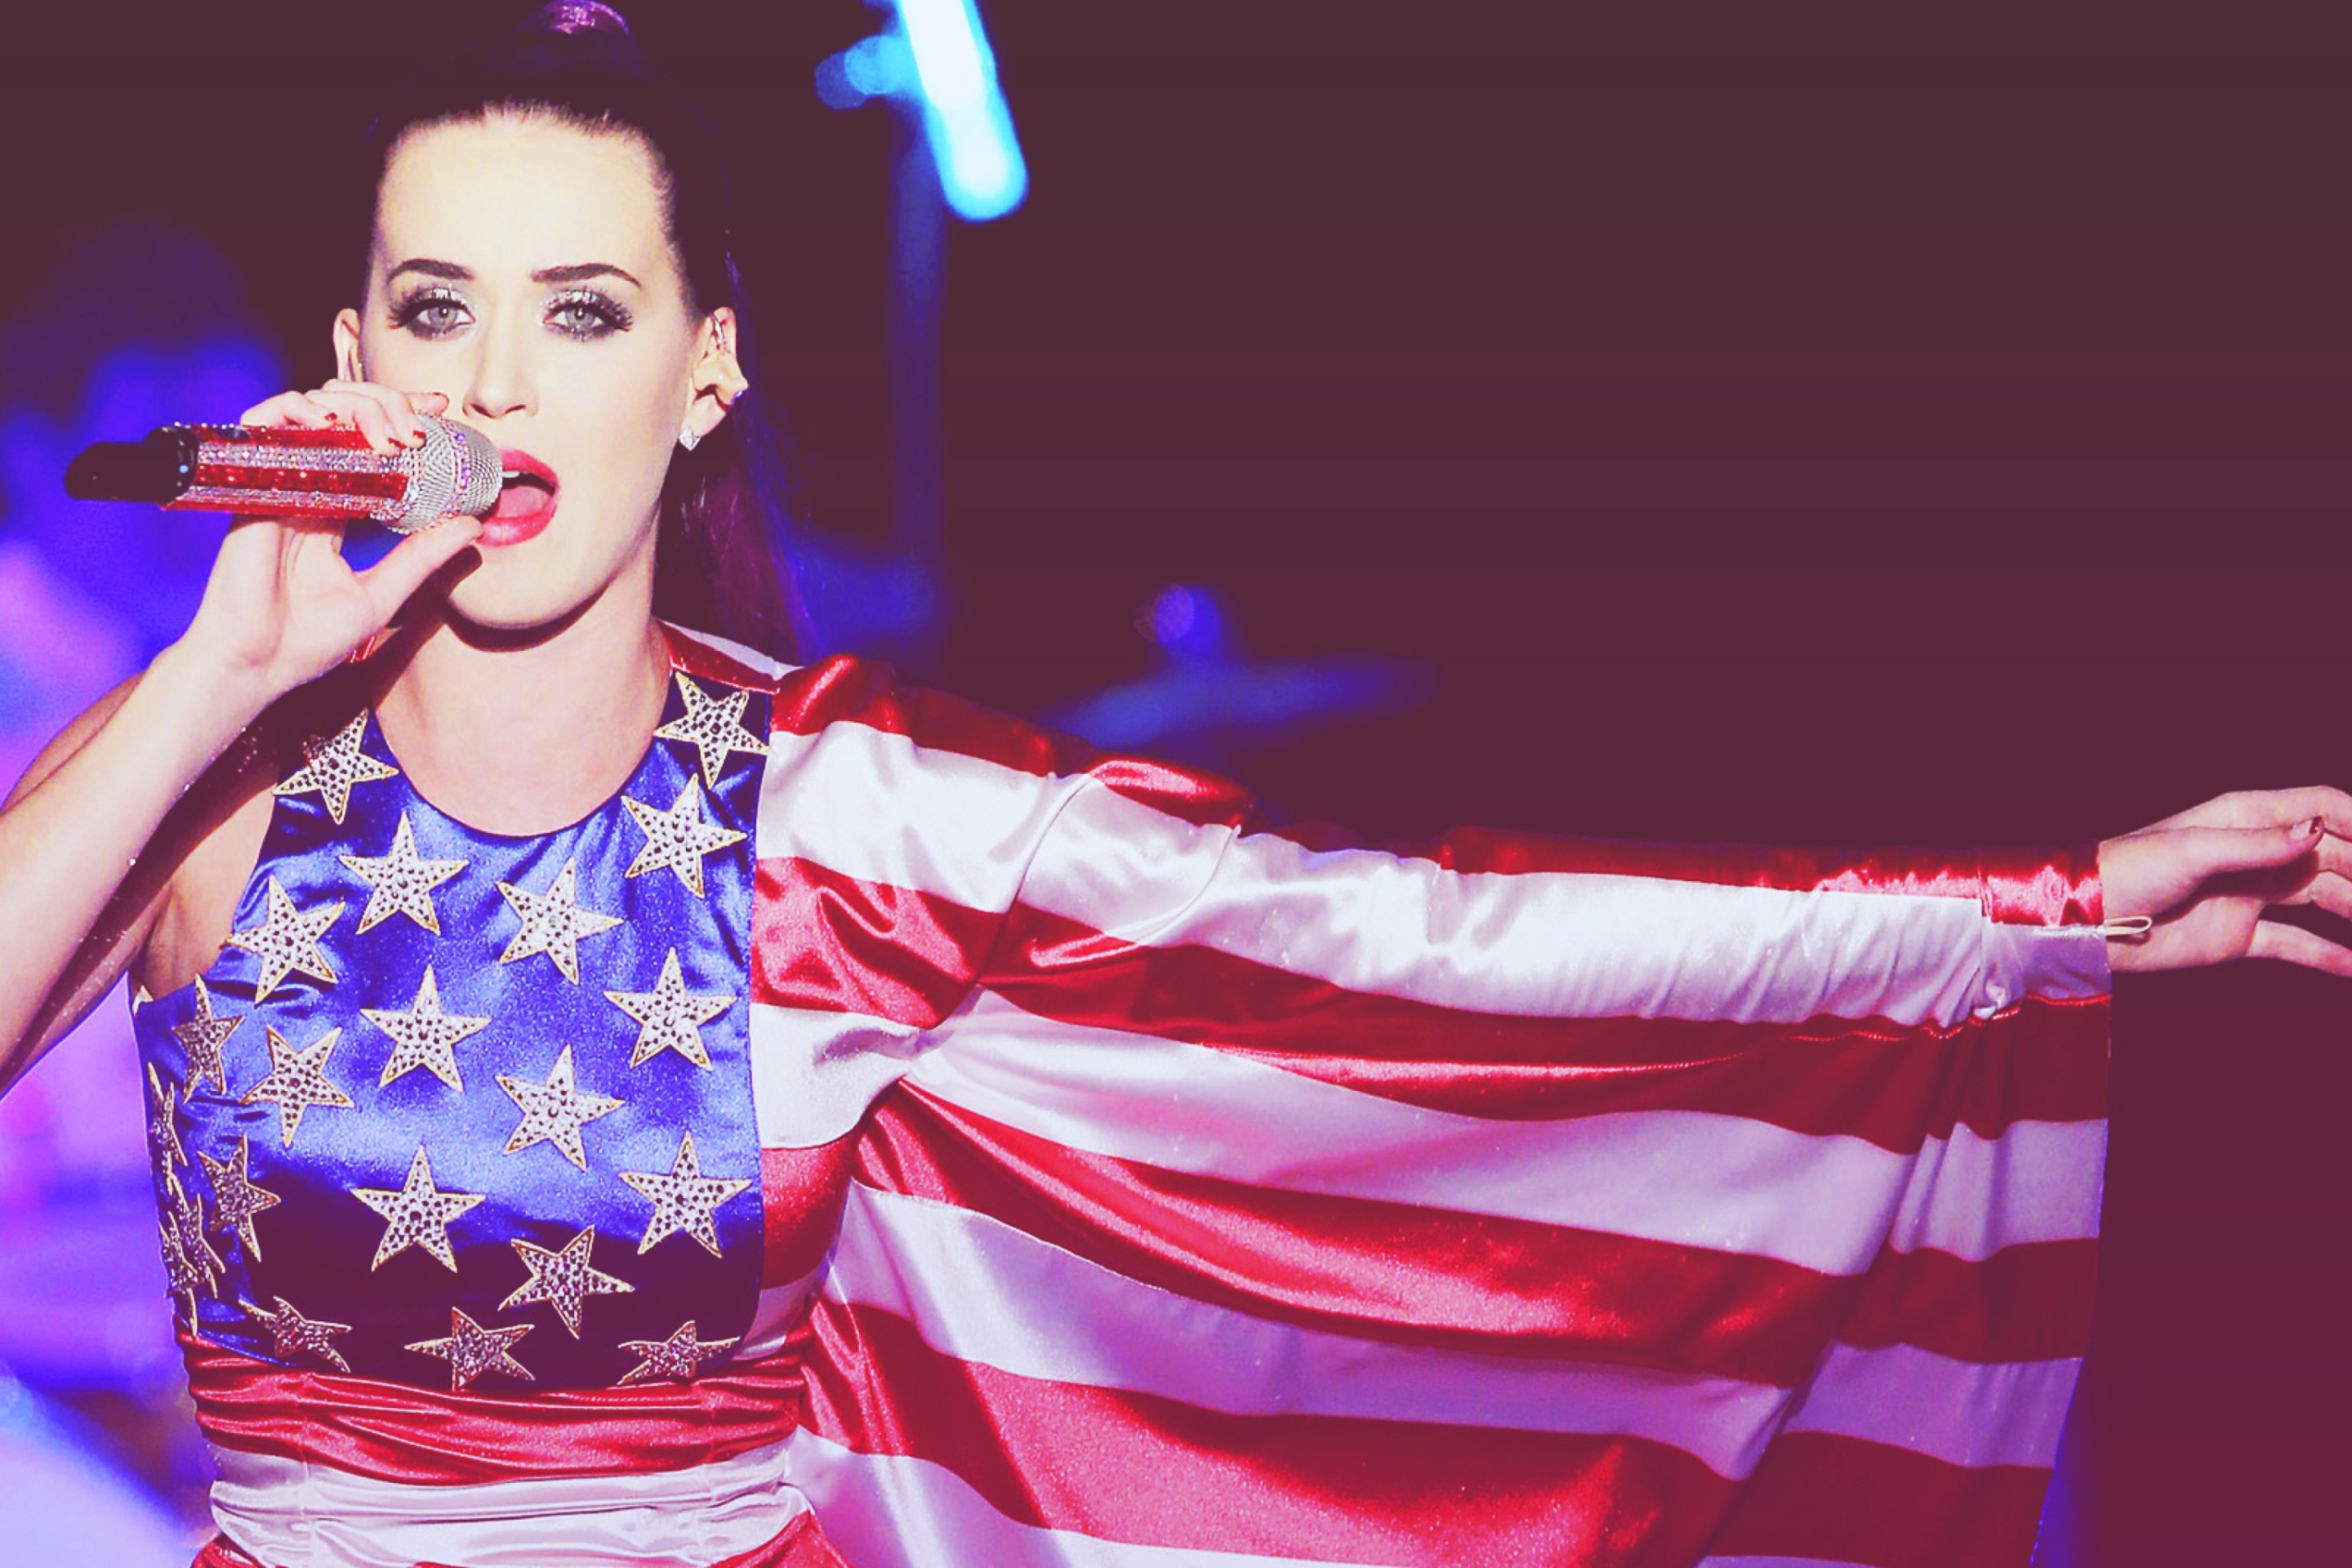 Katy Perry In American Flag Dress wallpaper 2880x1920